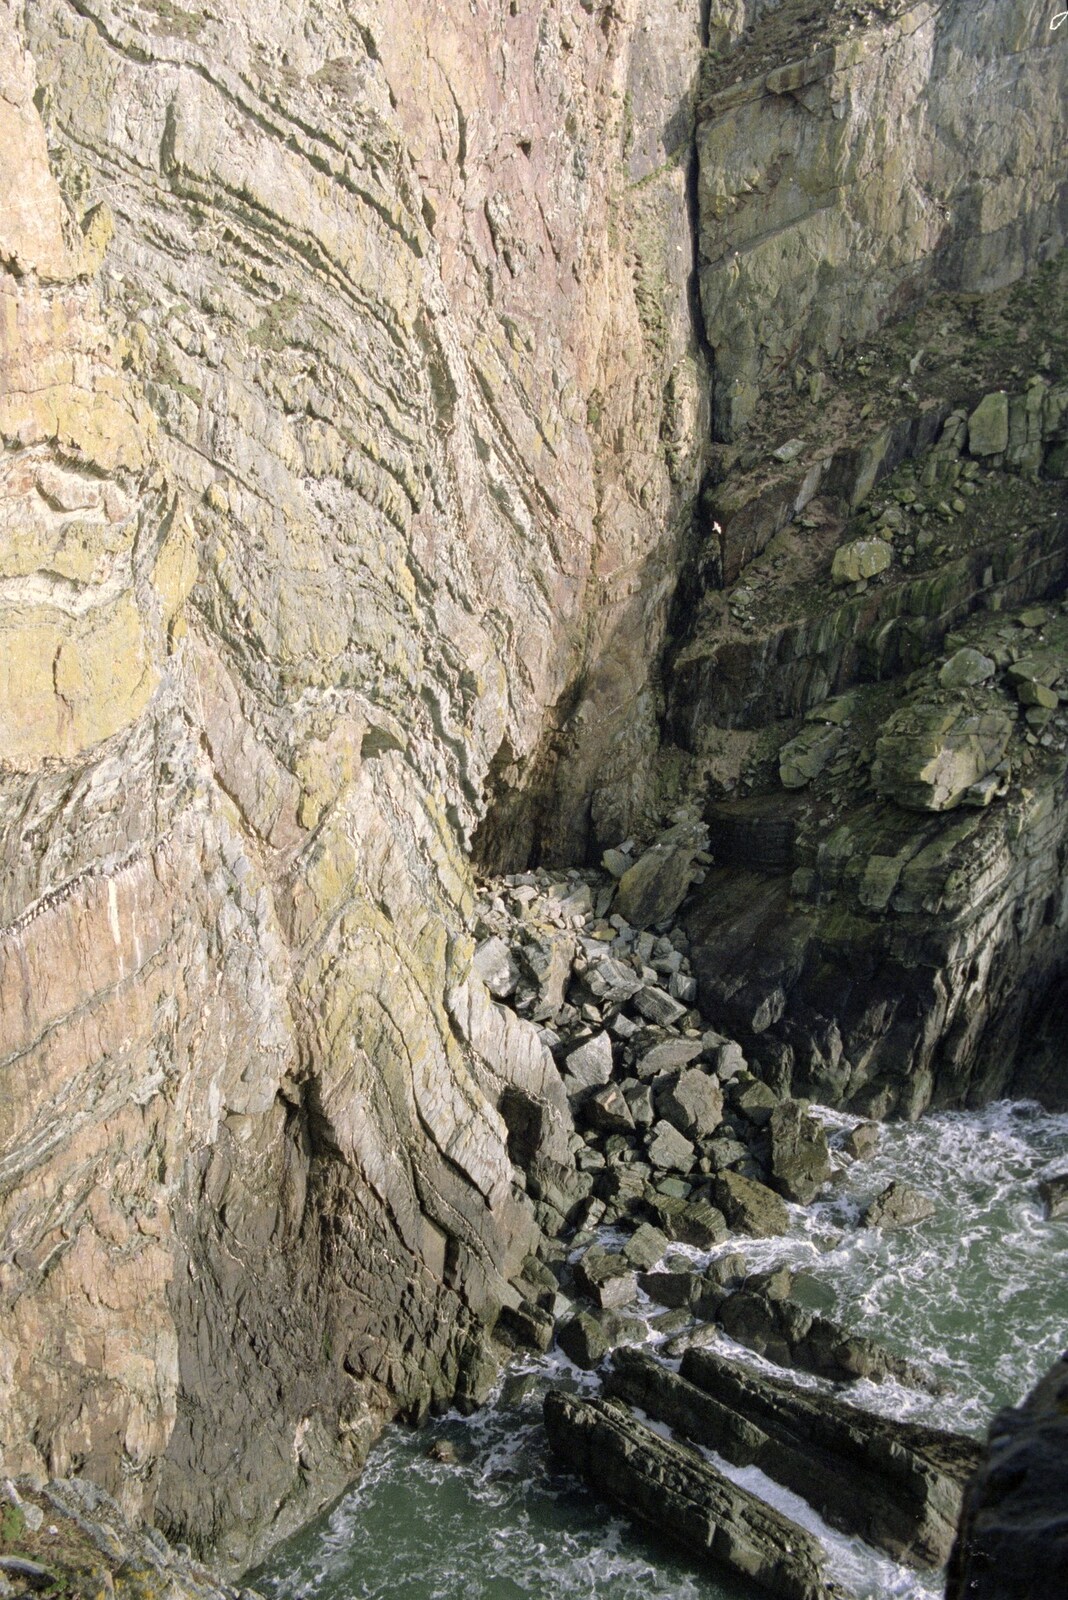 A sheer drop at South Stack on Anglessey from Capel Curig to Abergavenny: A Road-Trip With Hamish, Wales - 3rd April 1992